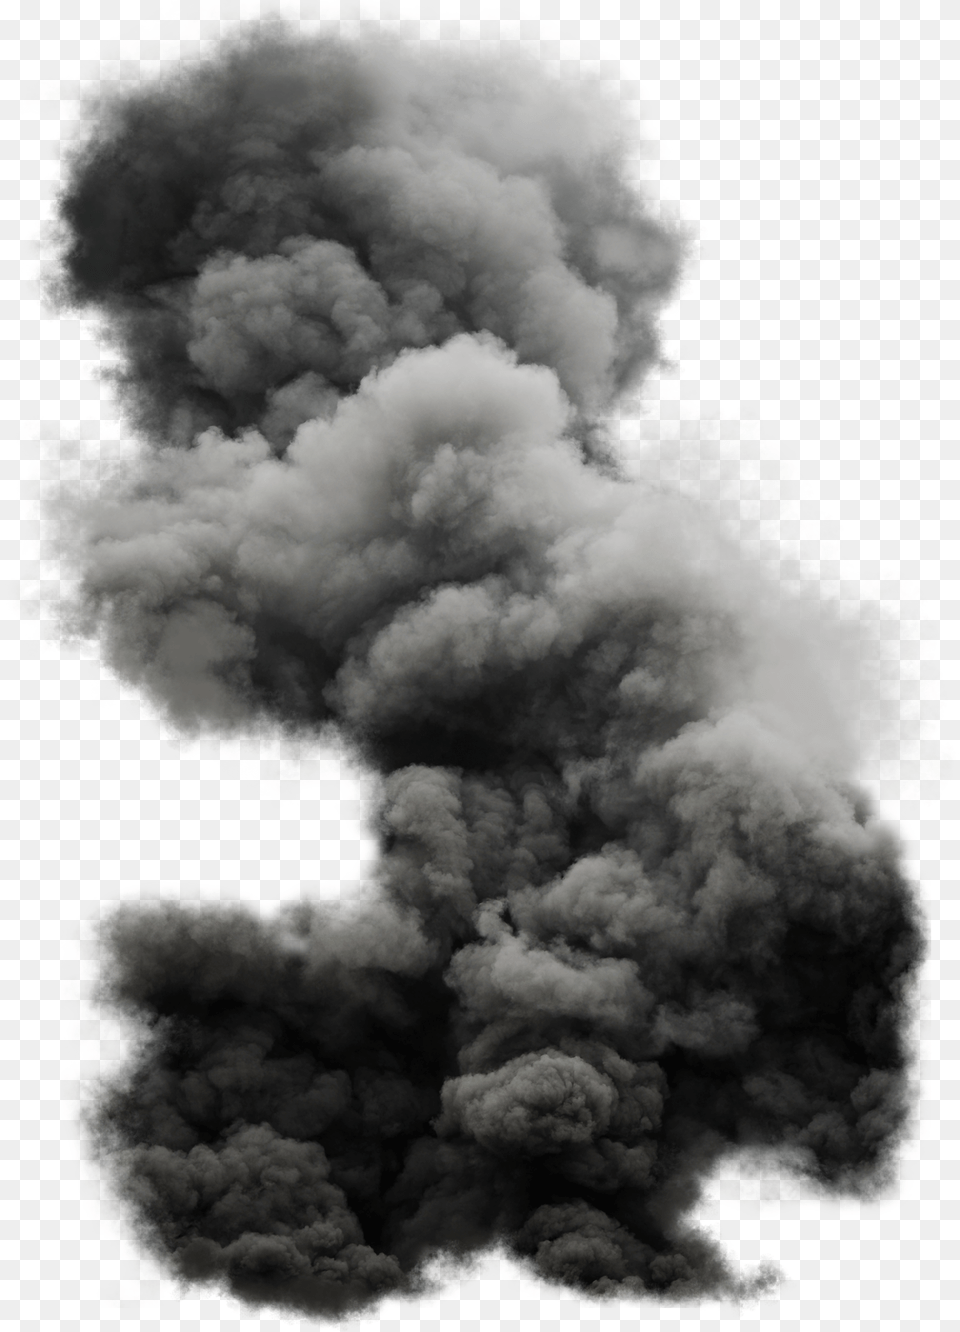 Black Cloud Smoke Big, Pollution, Nature, Outdoors Png